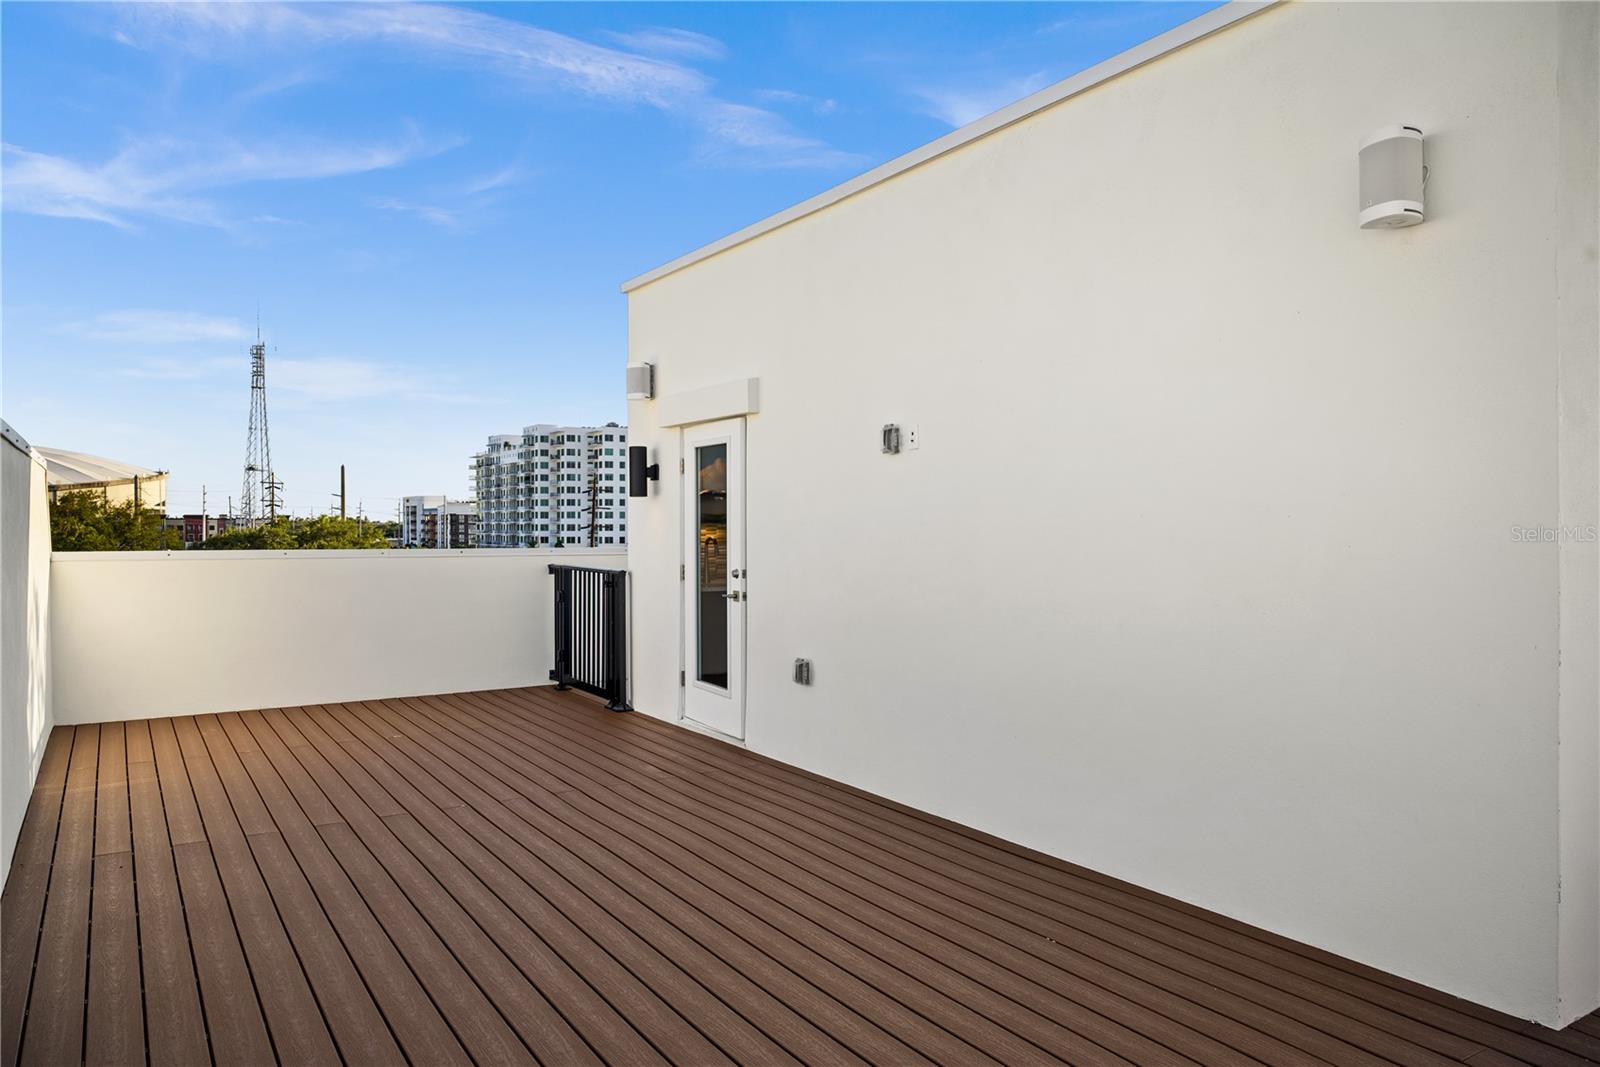 Rooftop terrace from similar home at development*